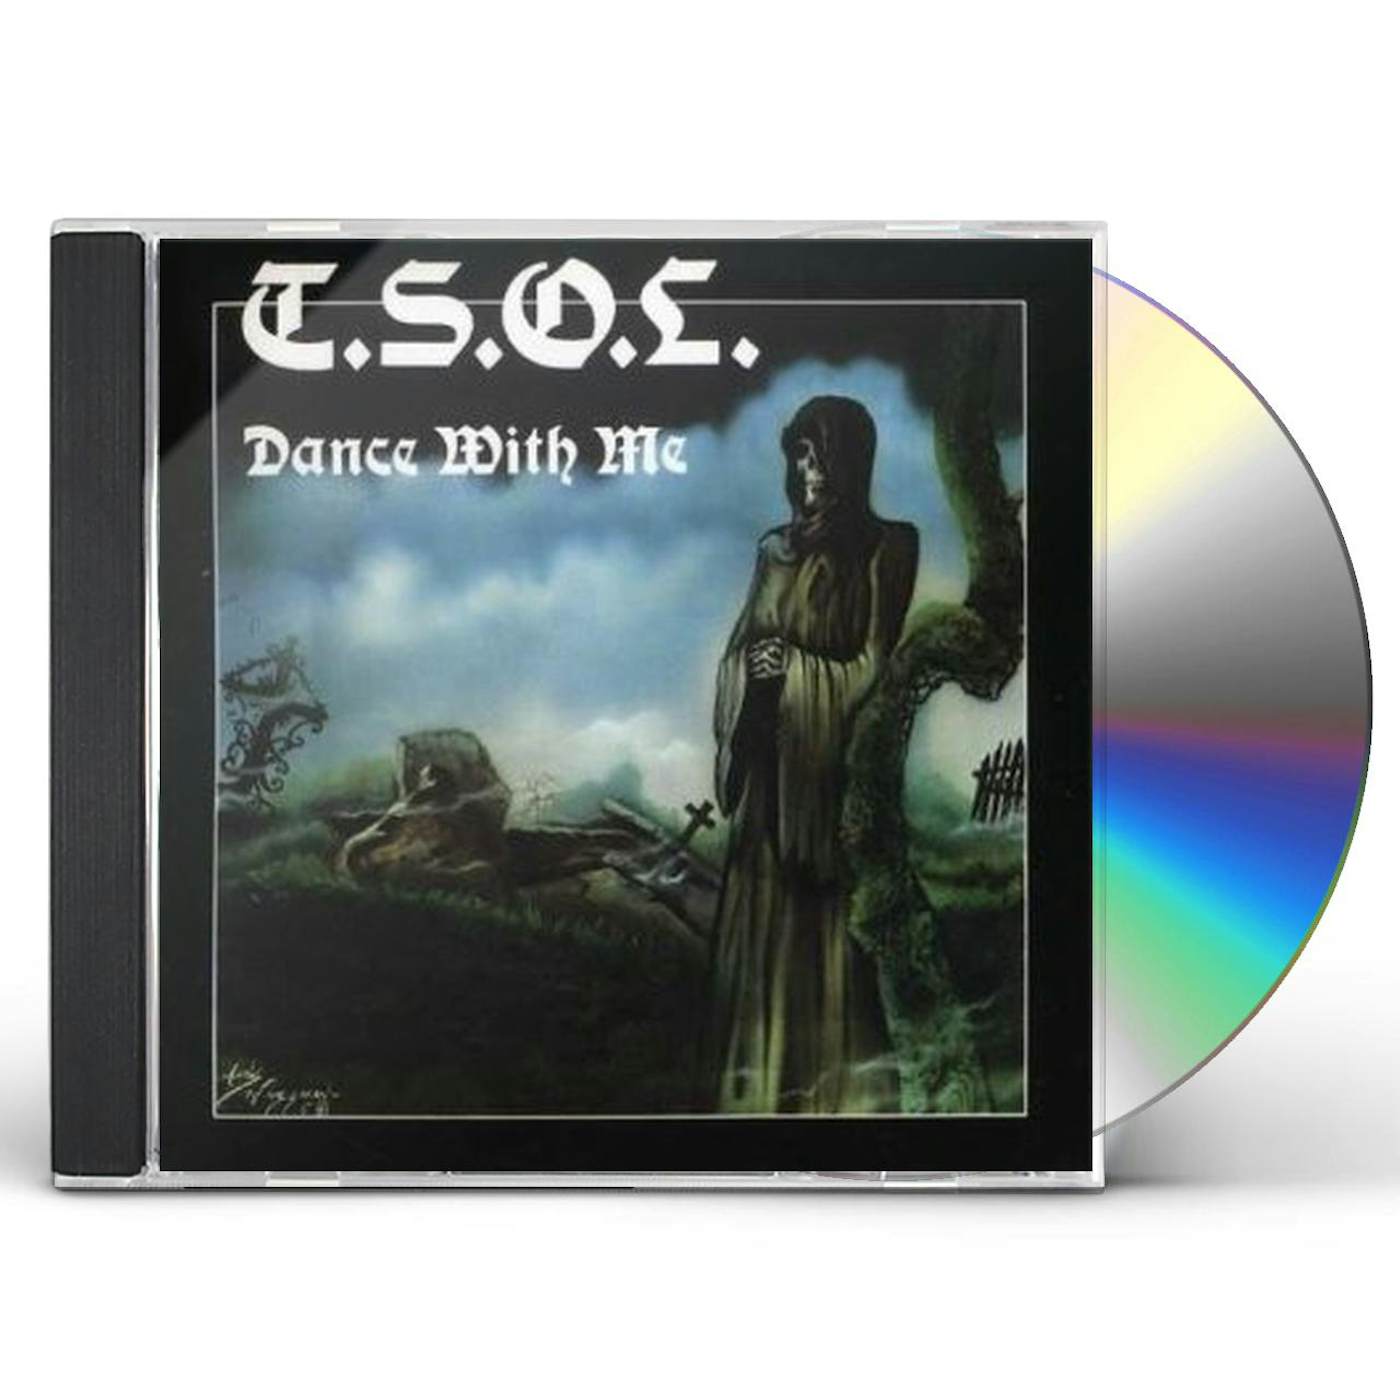 T.S.O.L. DANCE WITH ME CD